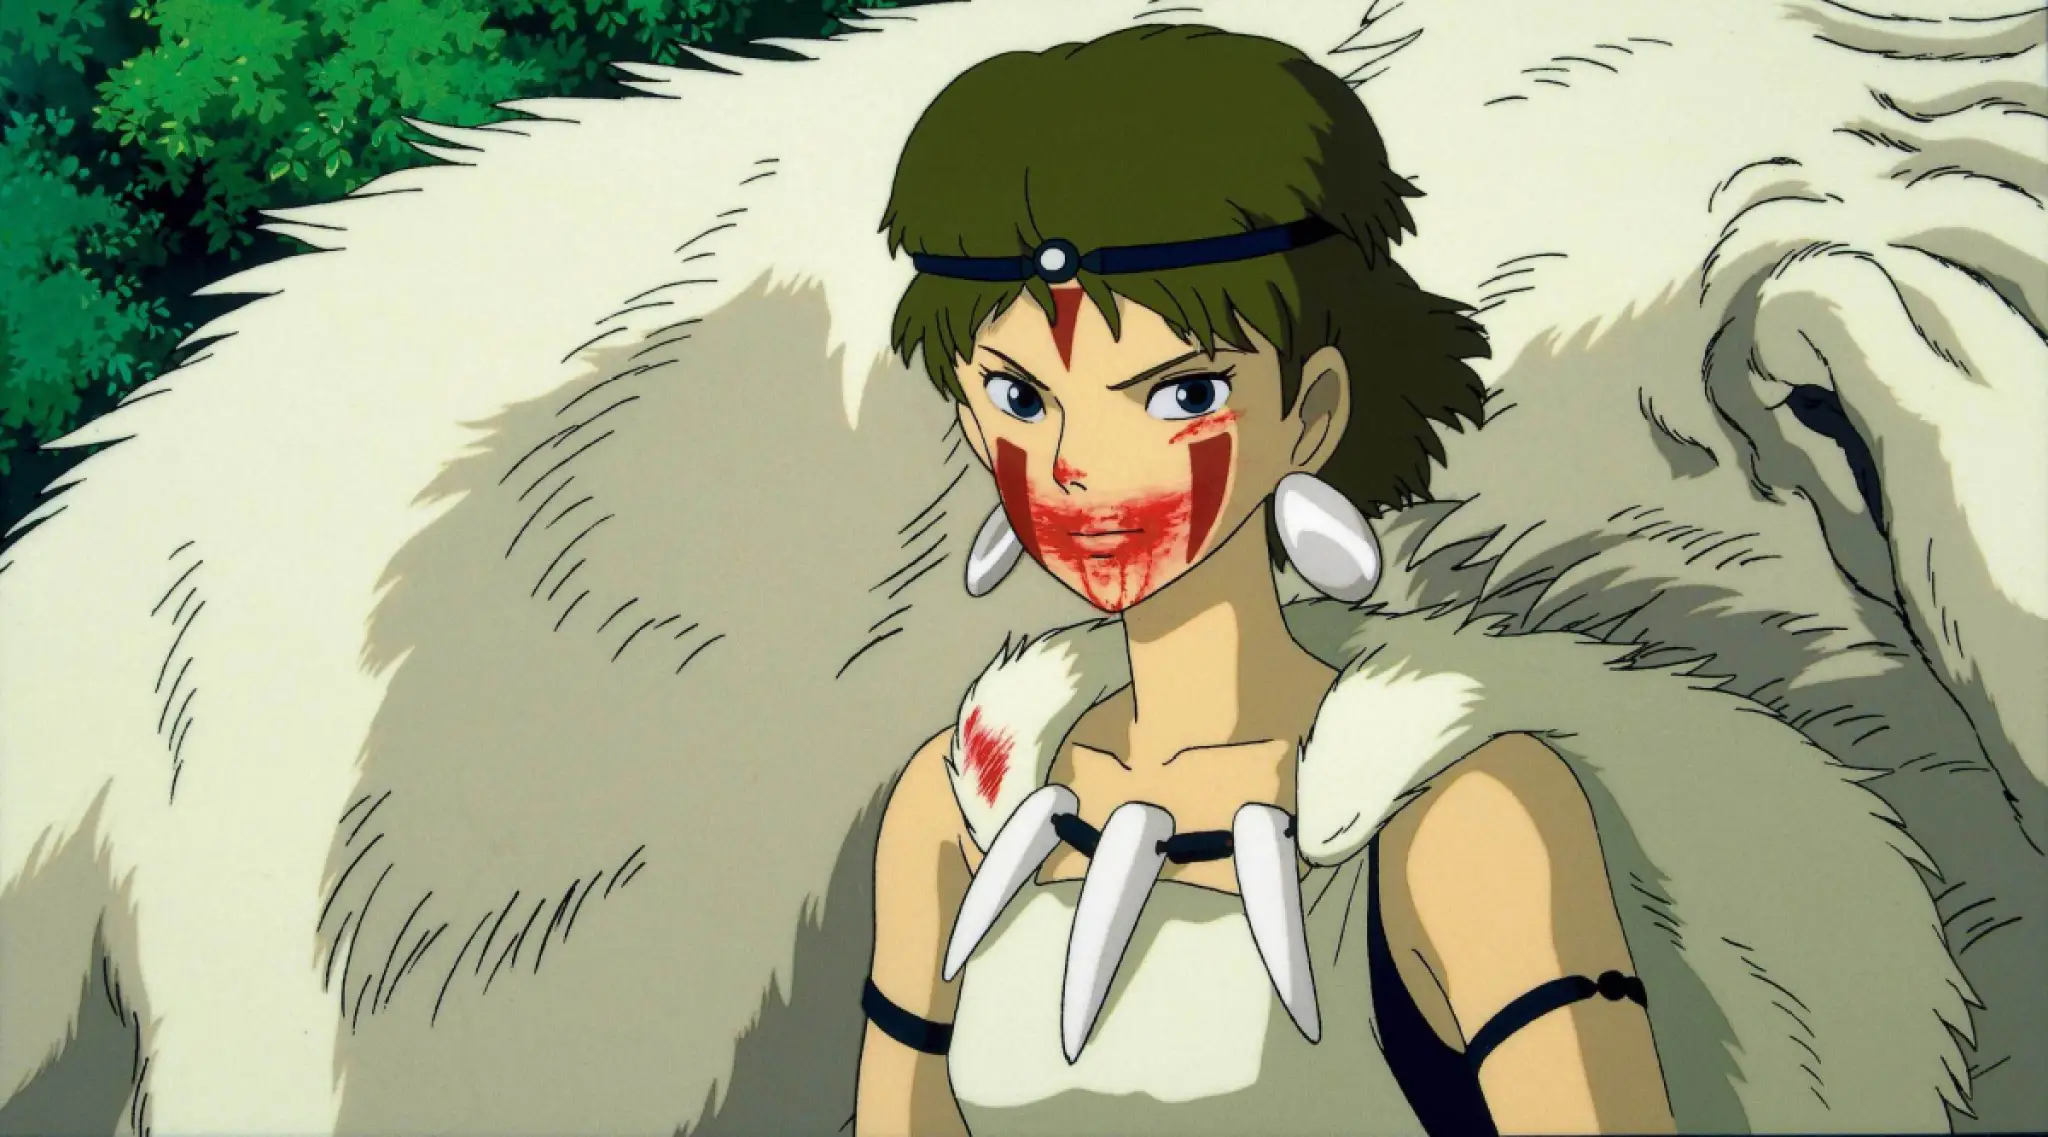 San with blood on her face